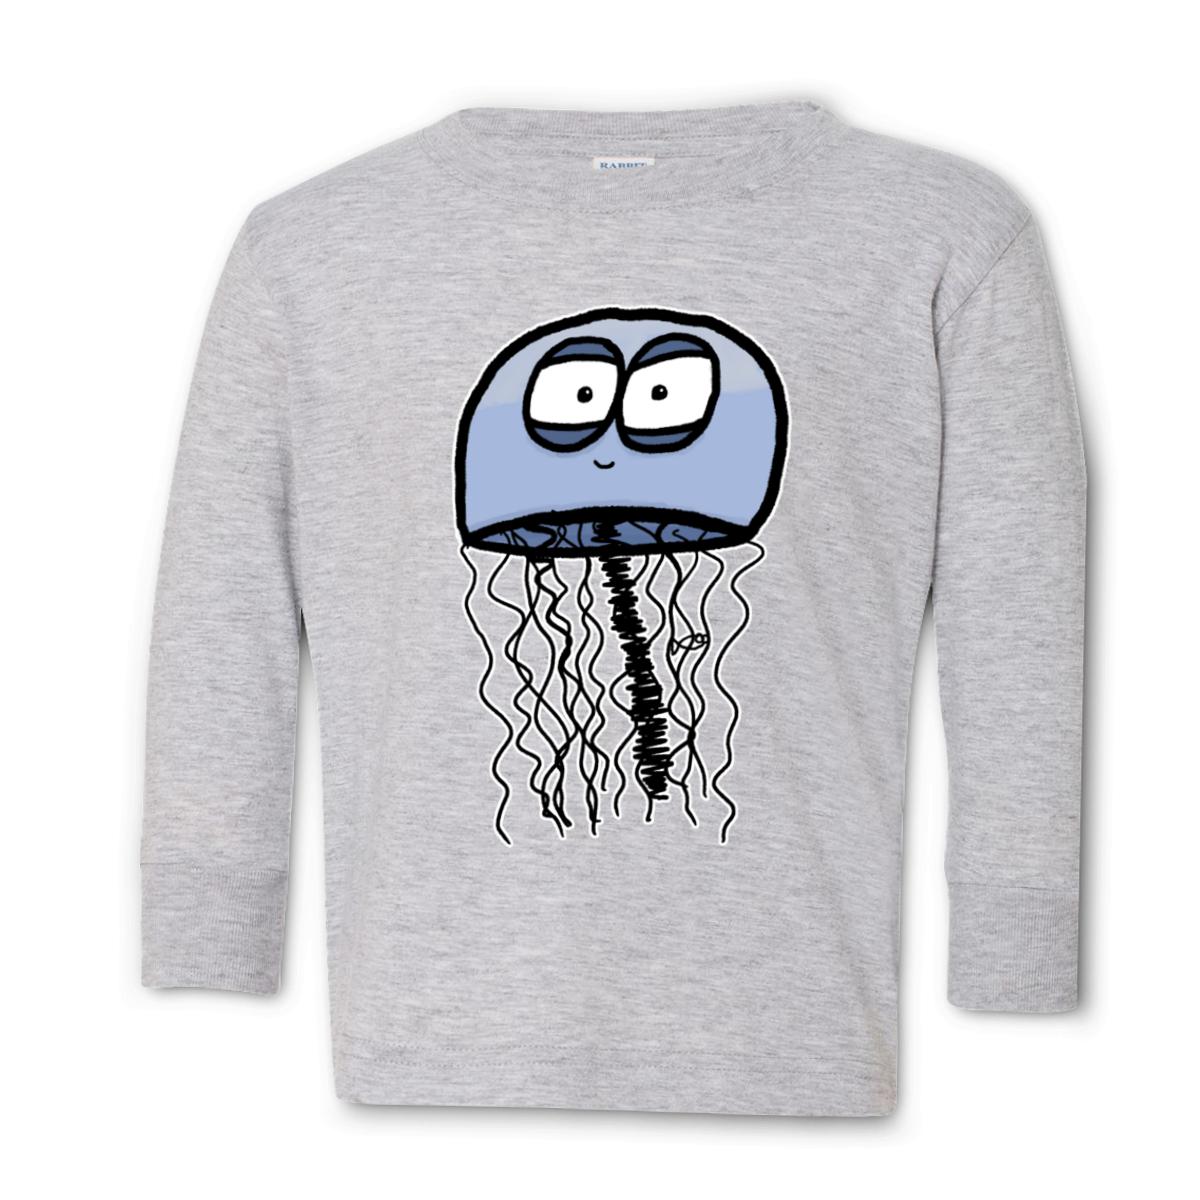 Jelly Fish Toddler Long Sleeve Tee 2T heather